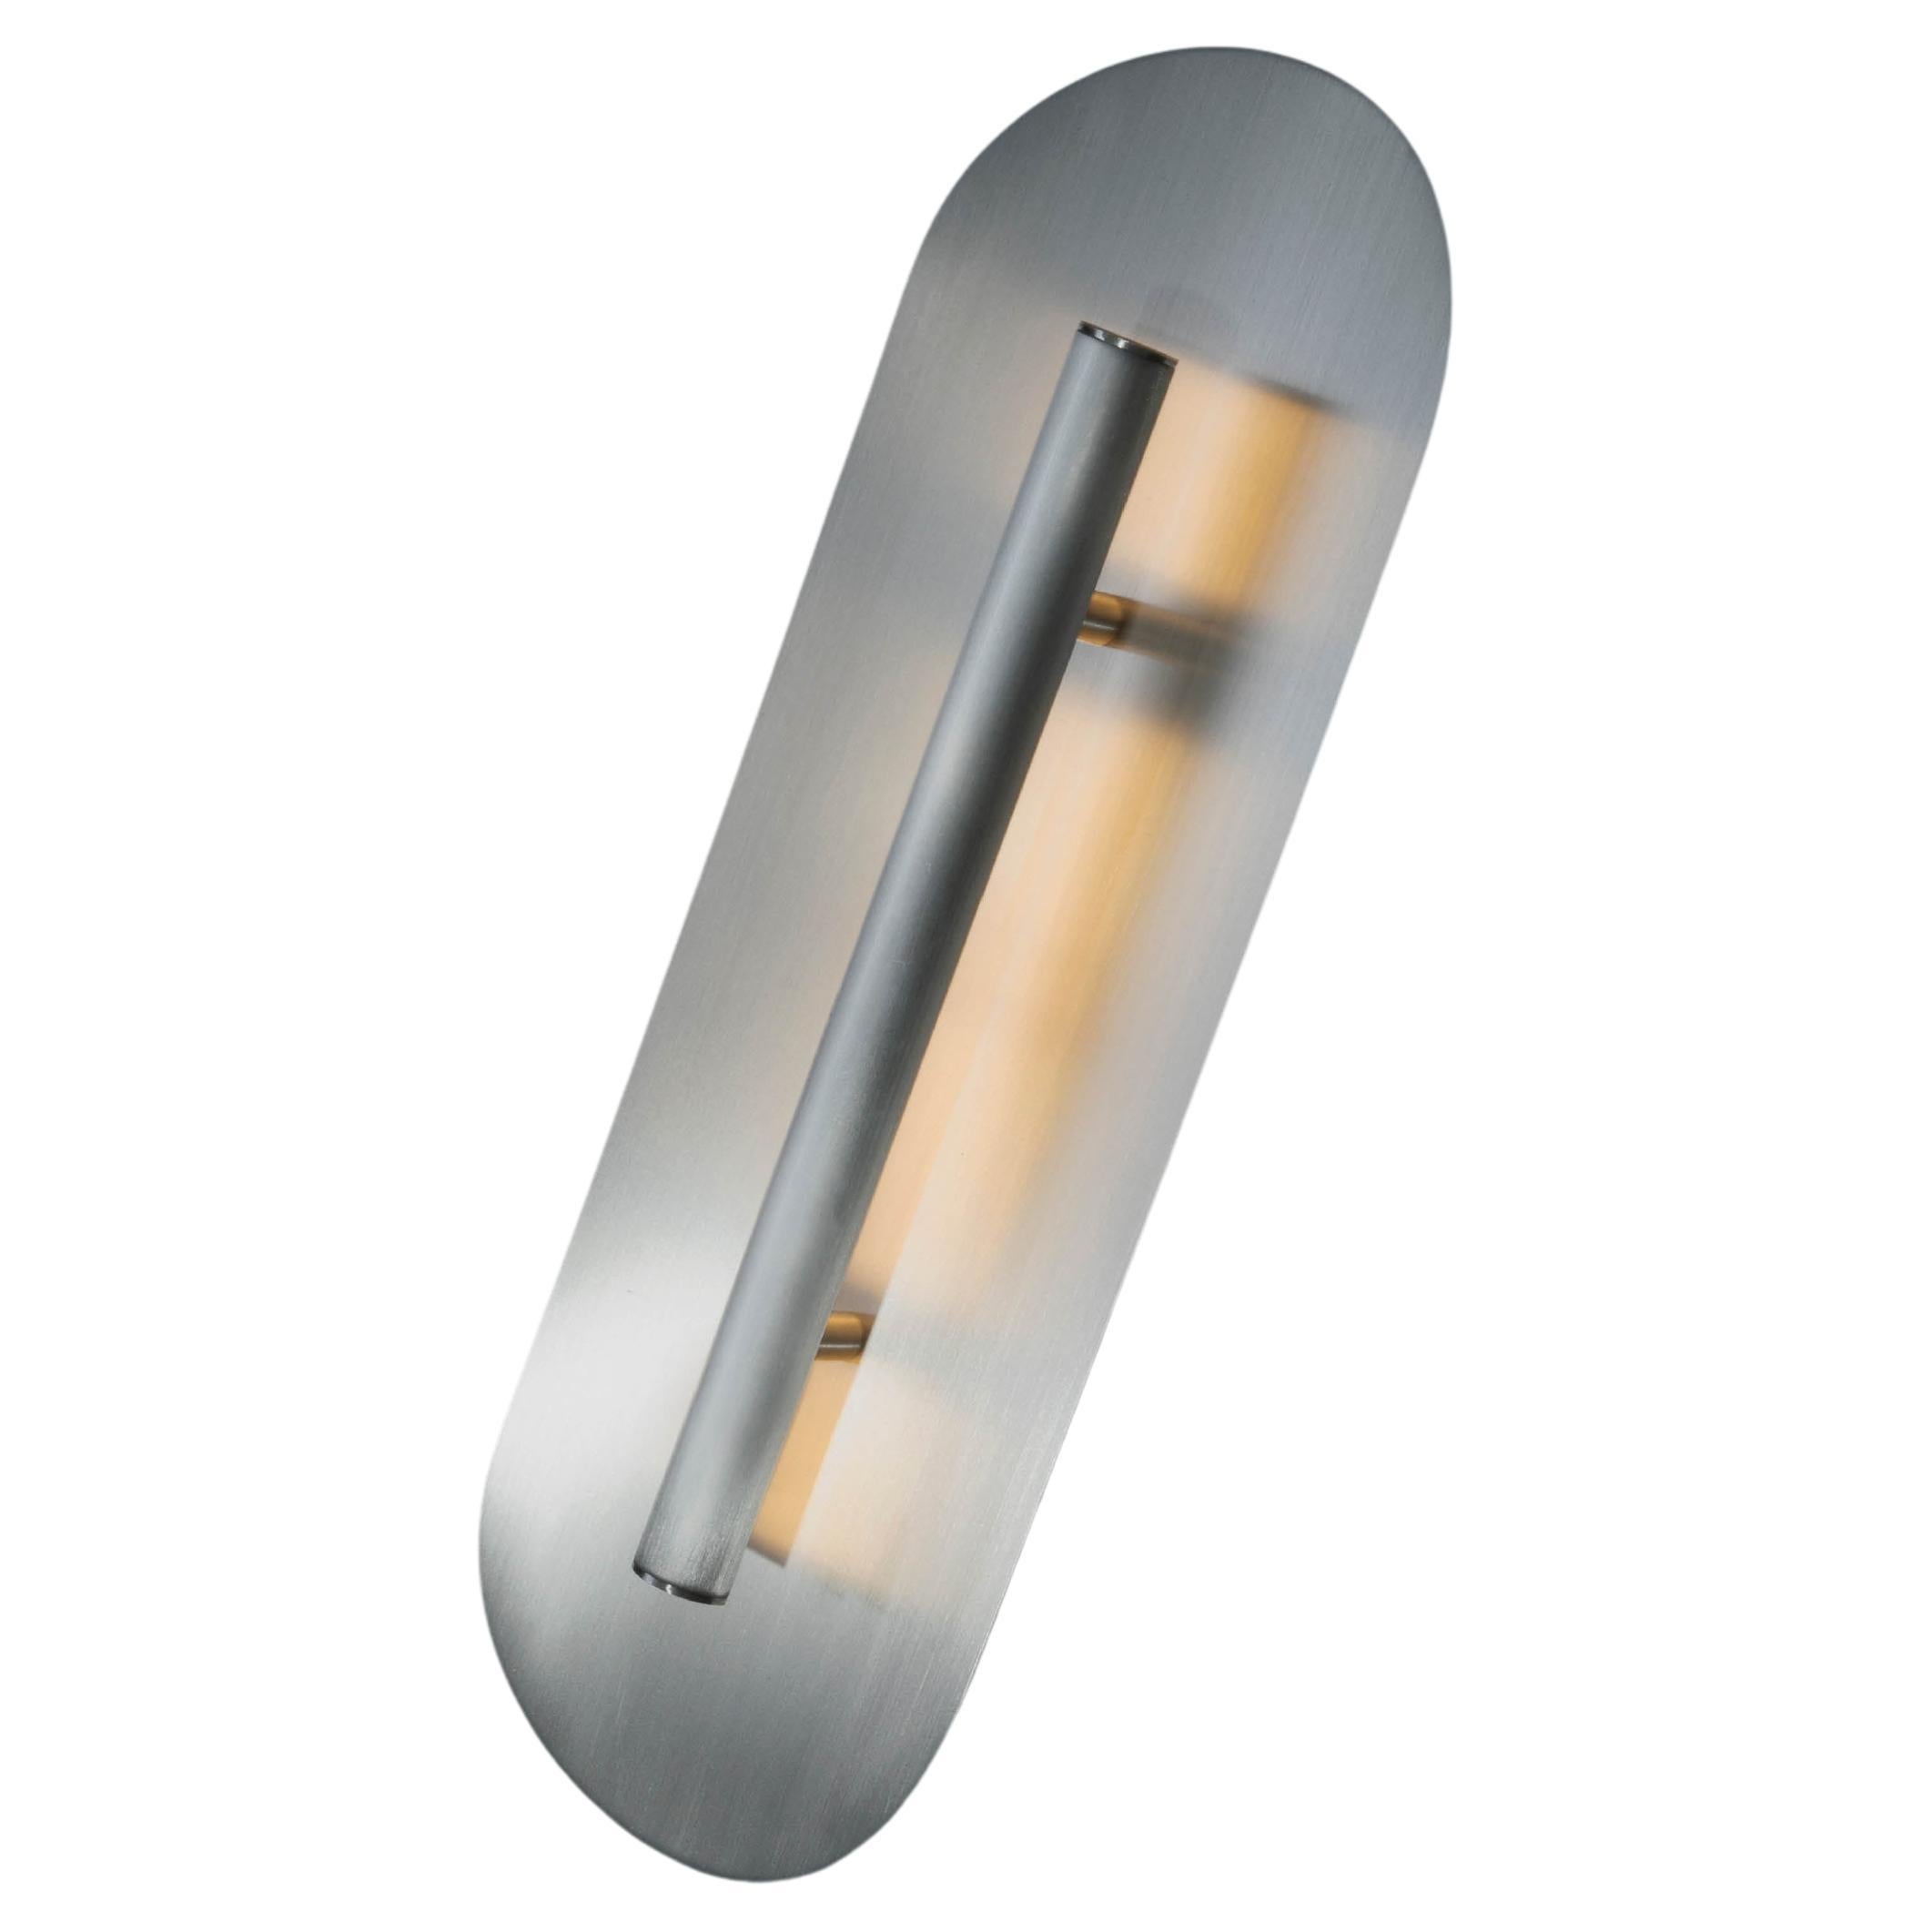 Reflector Wall Sconce 450, LED Light fixture, Raw Brushed Aluminum Metal For Sale